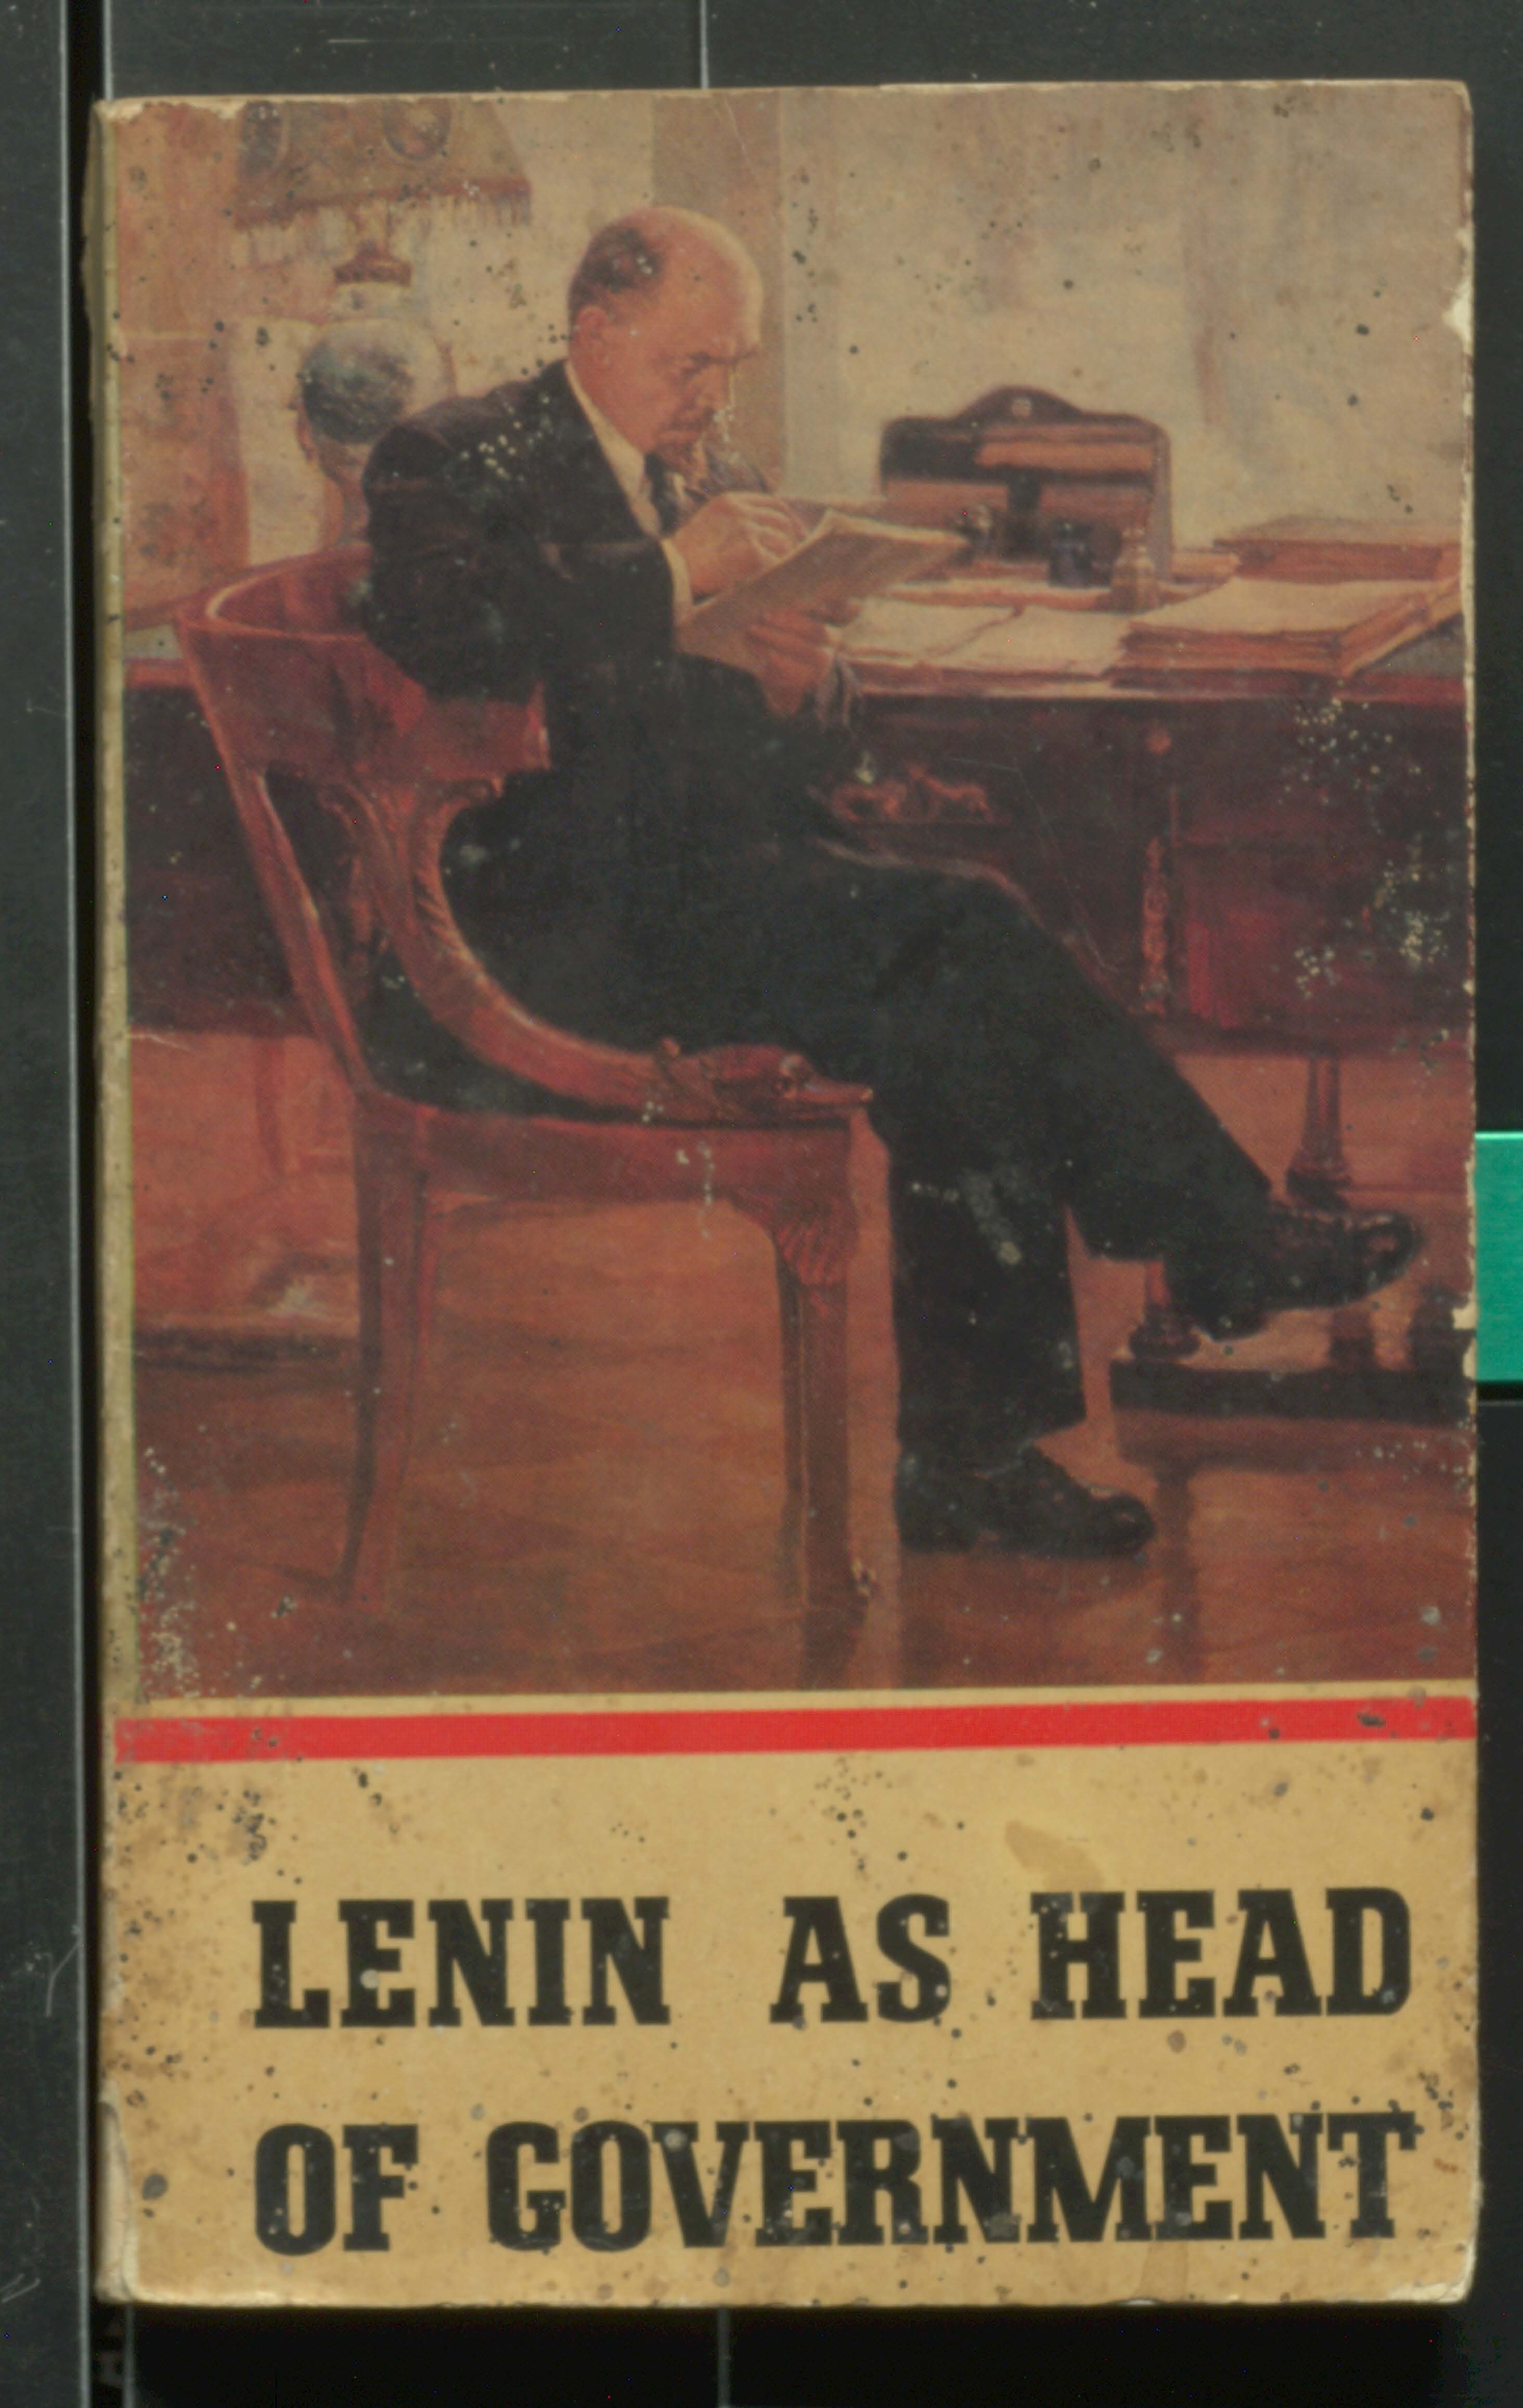 Lenin as head of government